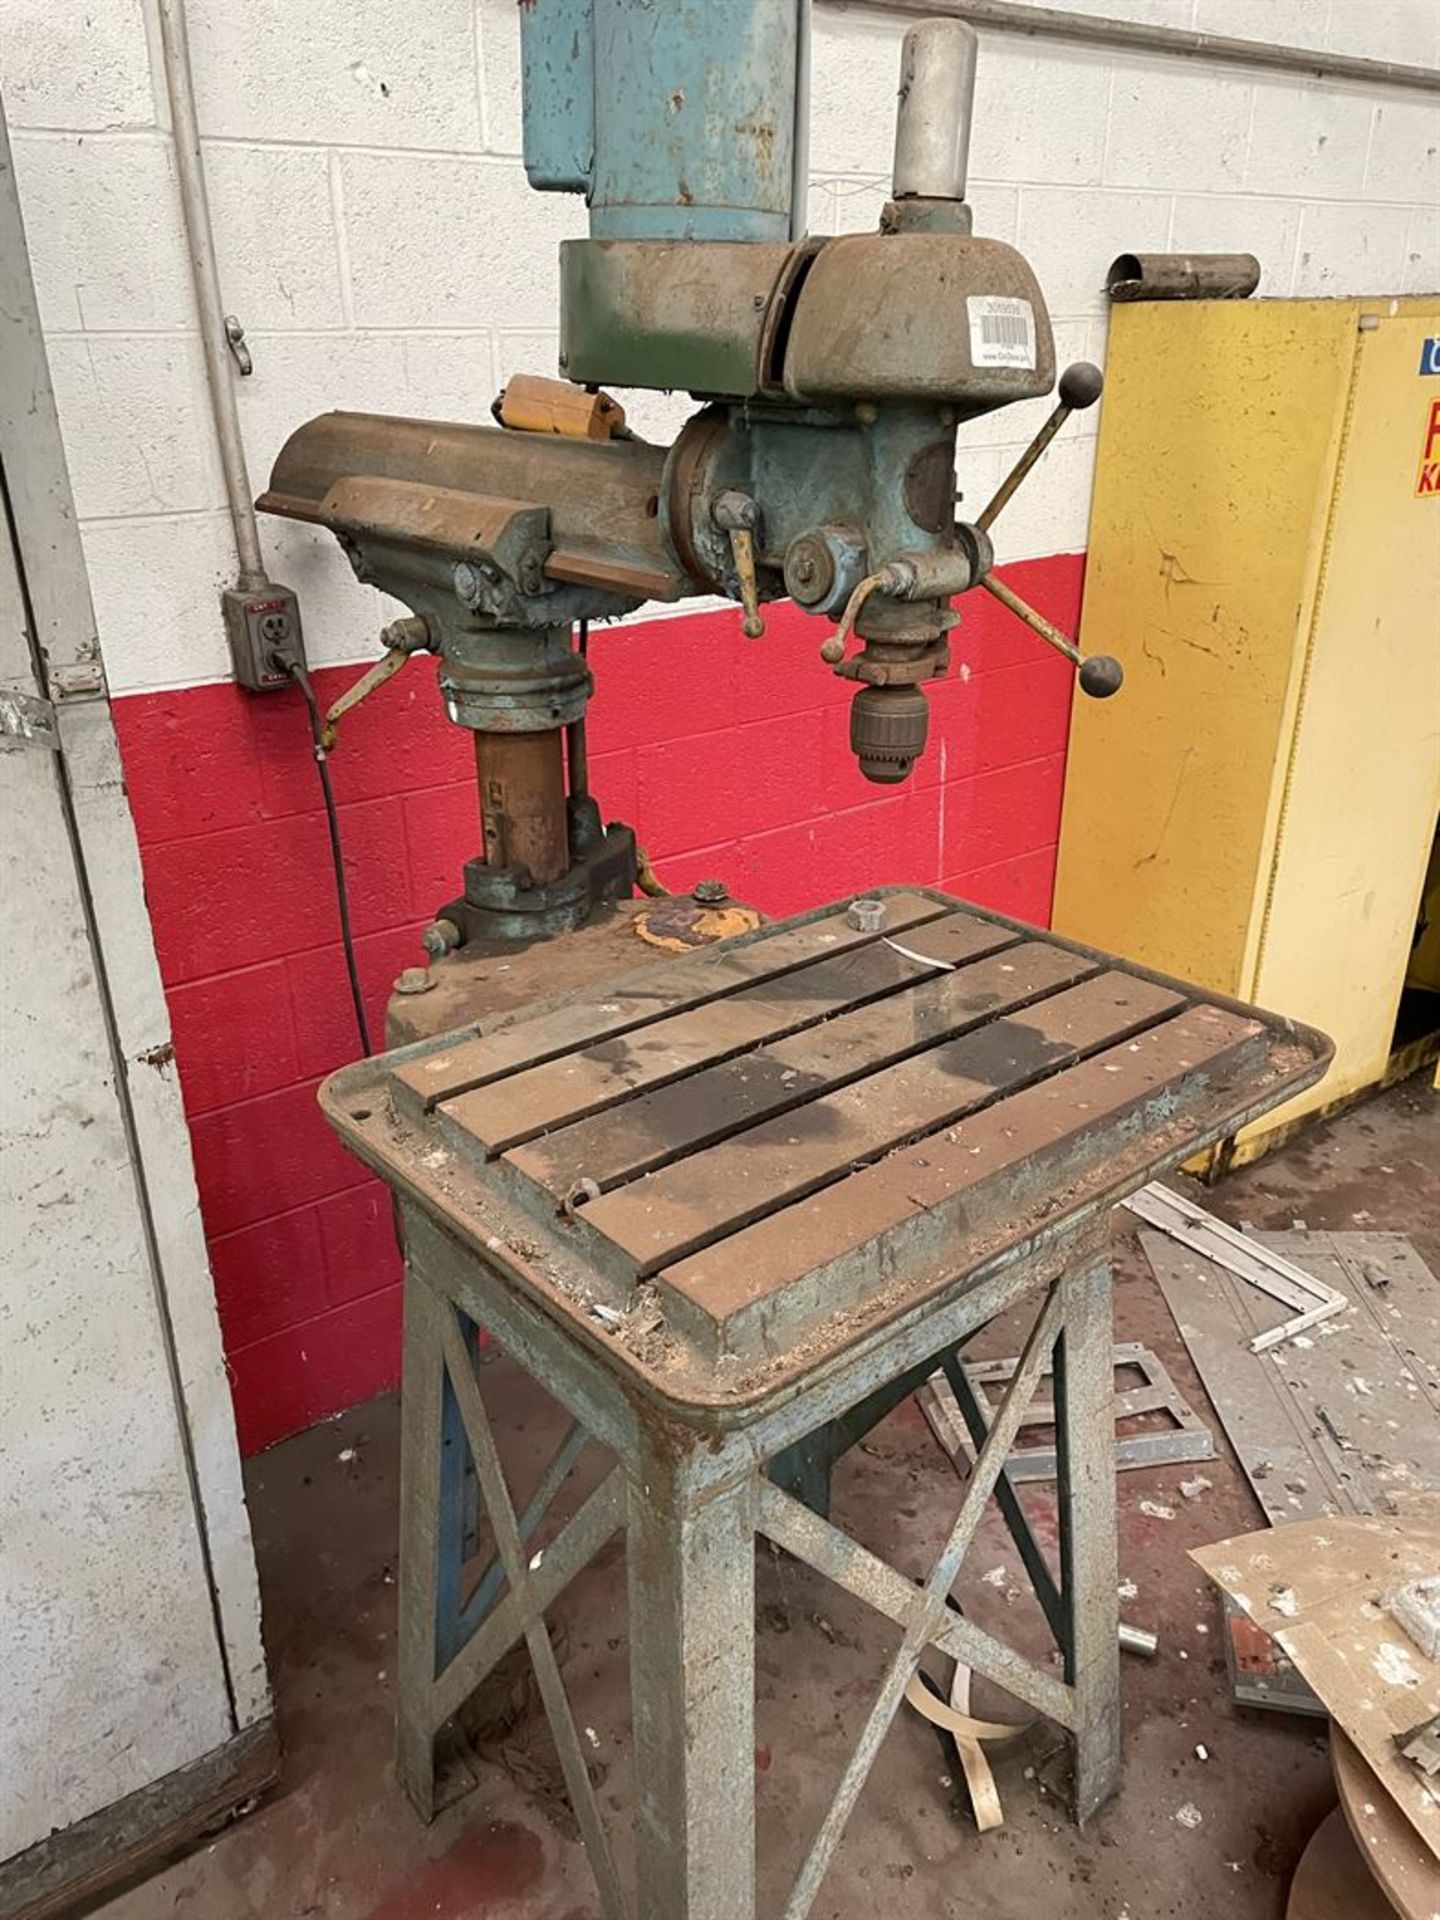 WALKER TURNER Drill Press, s/n NA, 1725 RPM, 1/2 HP, 110 V (Condition Unknown) - Image 3 of 3